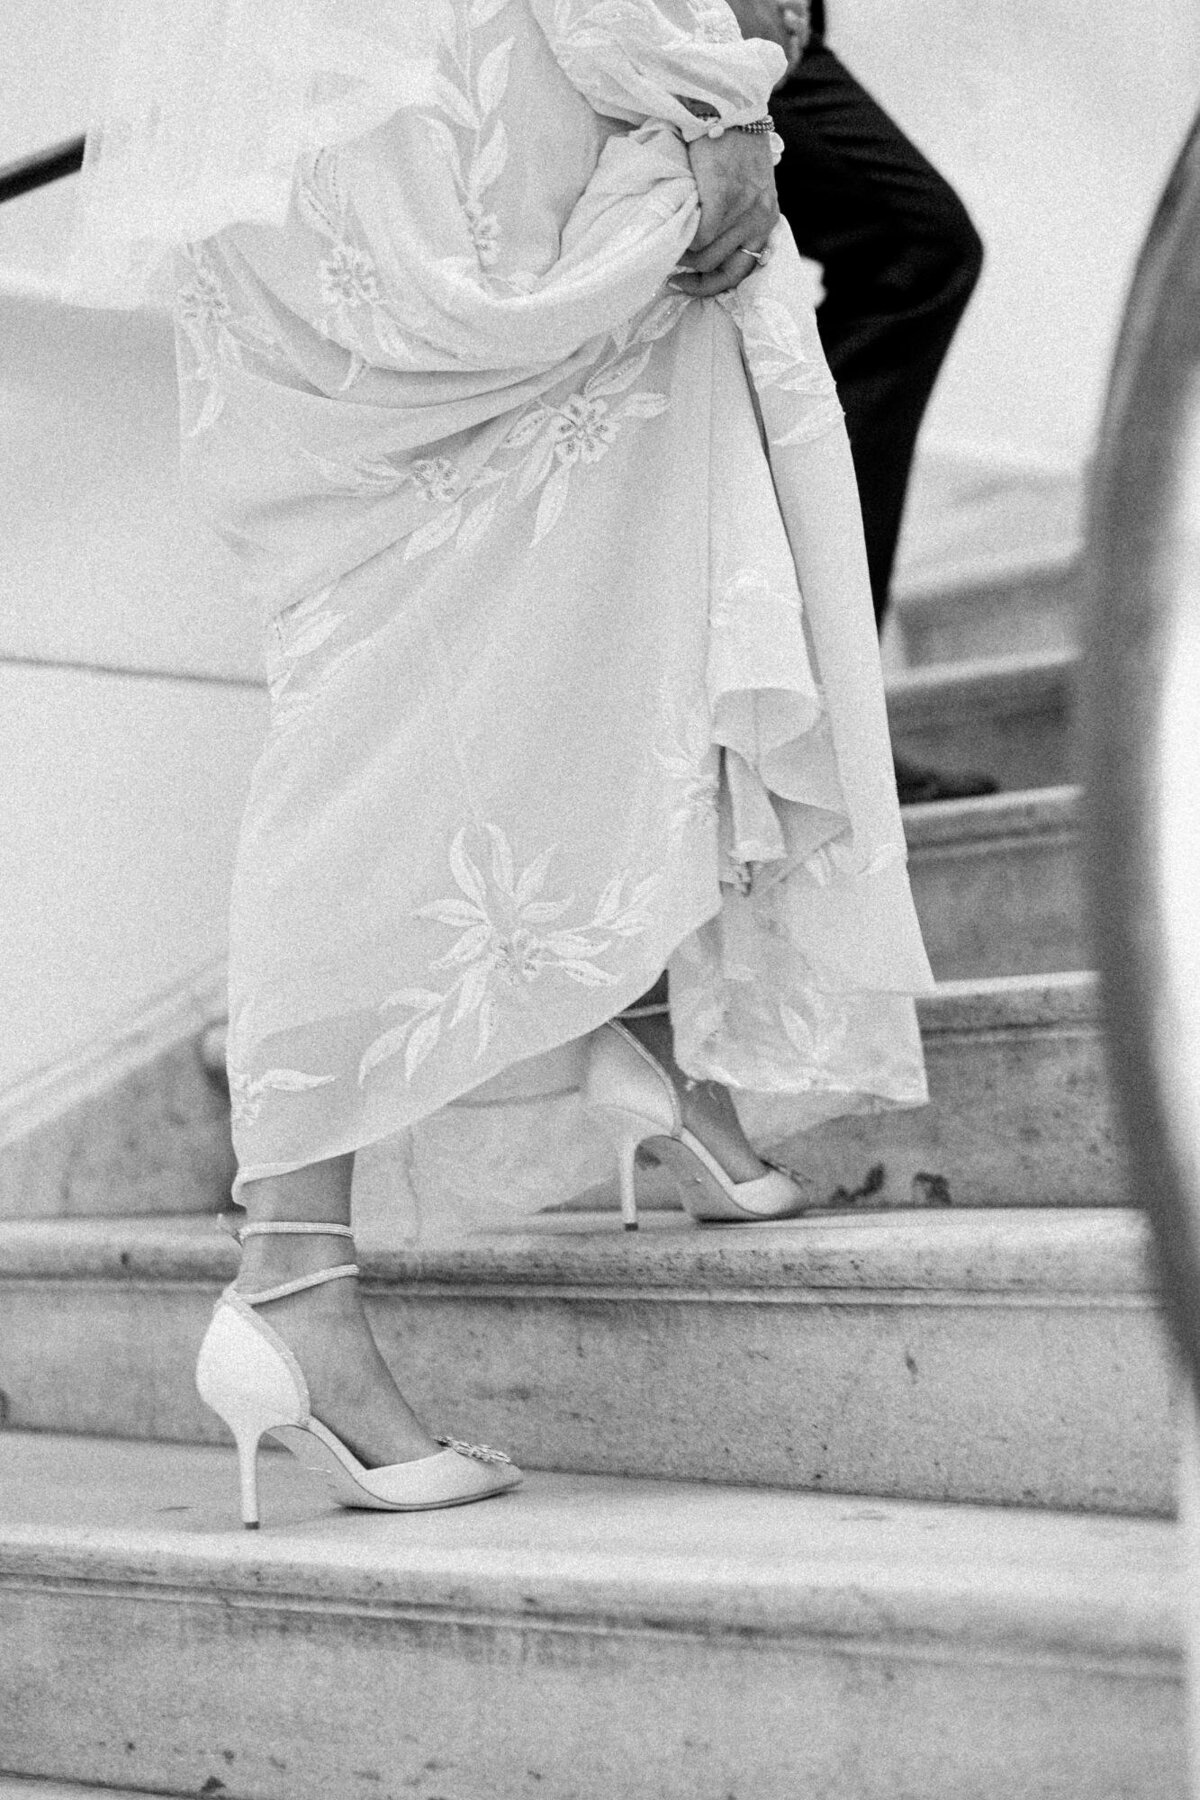 A bride lifting her dress as she ascends stairs with her partner, showcasing her white heels.